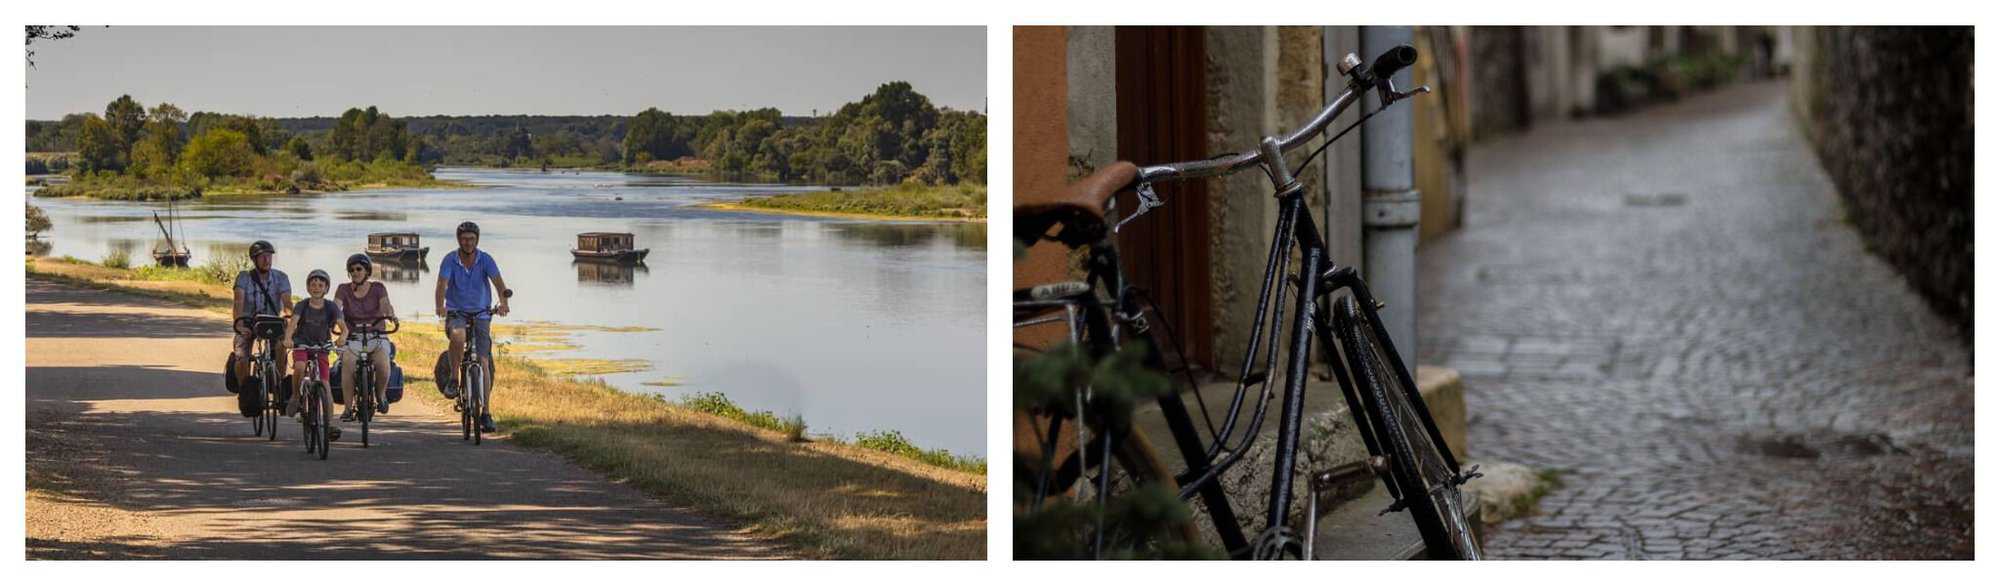 Left: Family of four cycle next to water in the Loire. Right: Old-fashioned bicycle leans up against a wall on a cobbled street